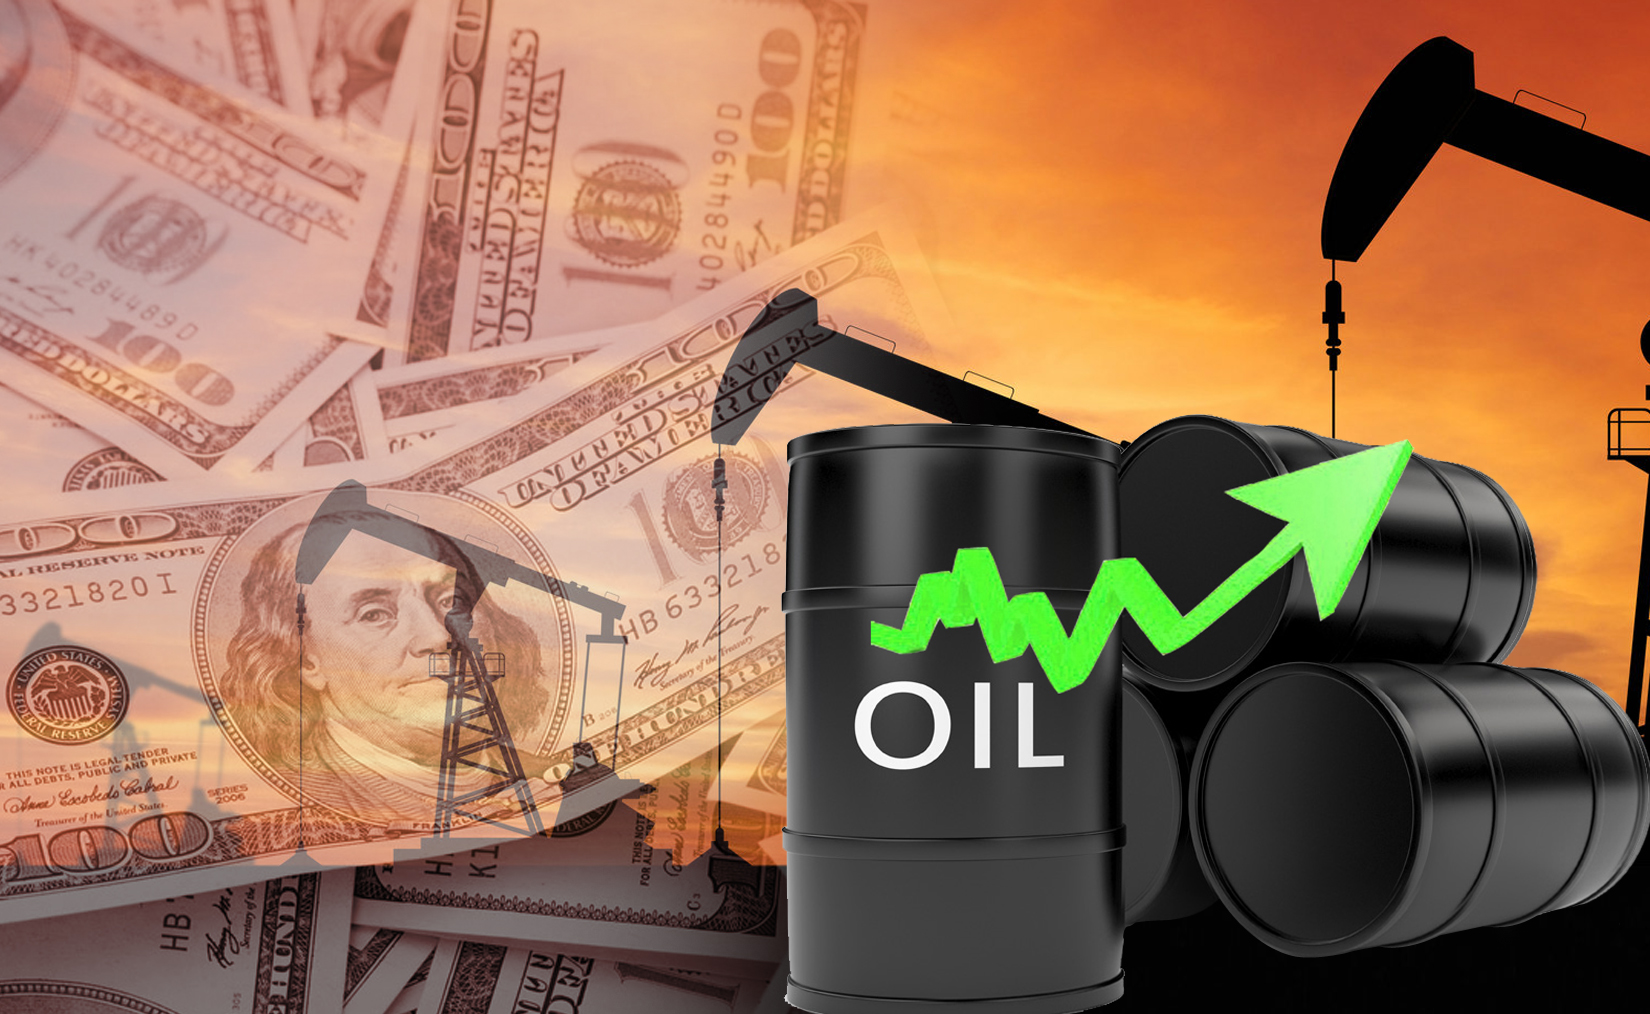 Kuwait oil price up 23 cents to USD 72.96 pb                                                                                                                                                                                                              